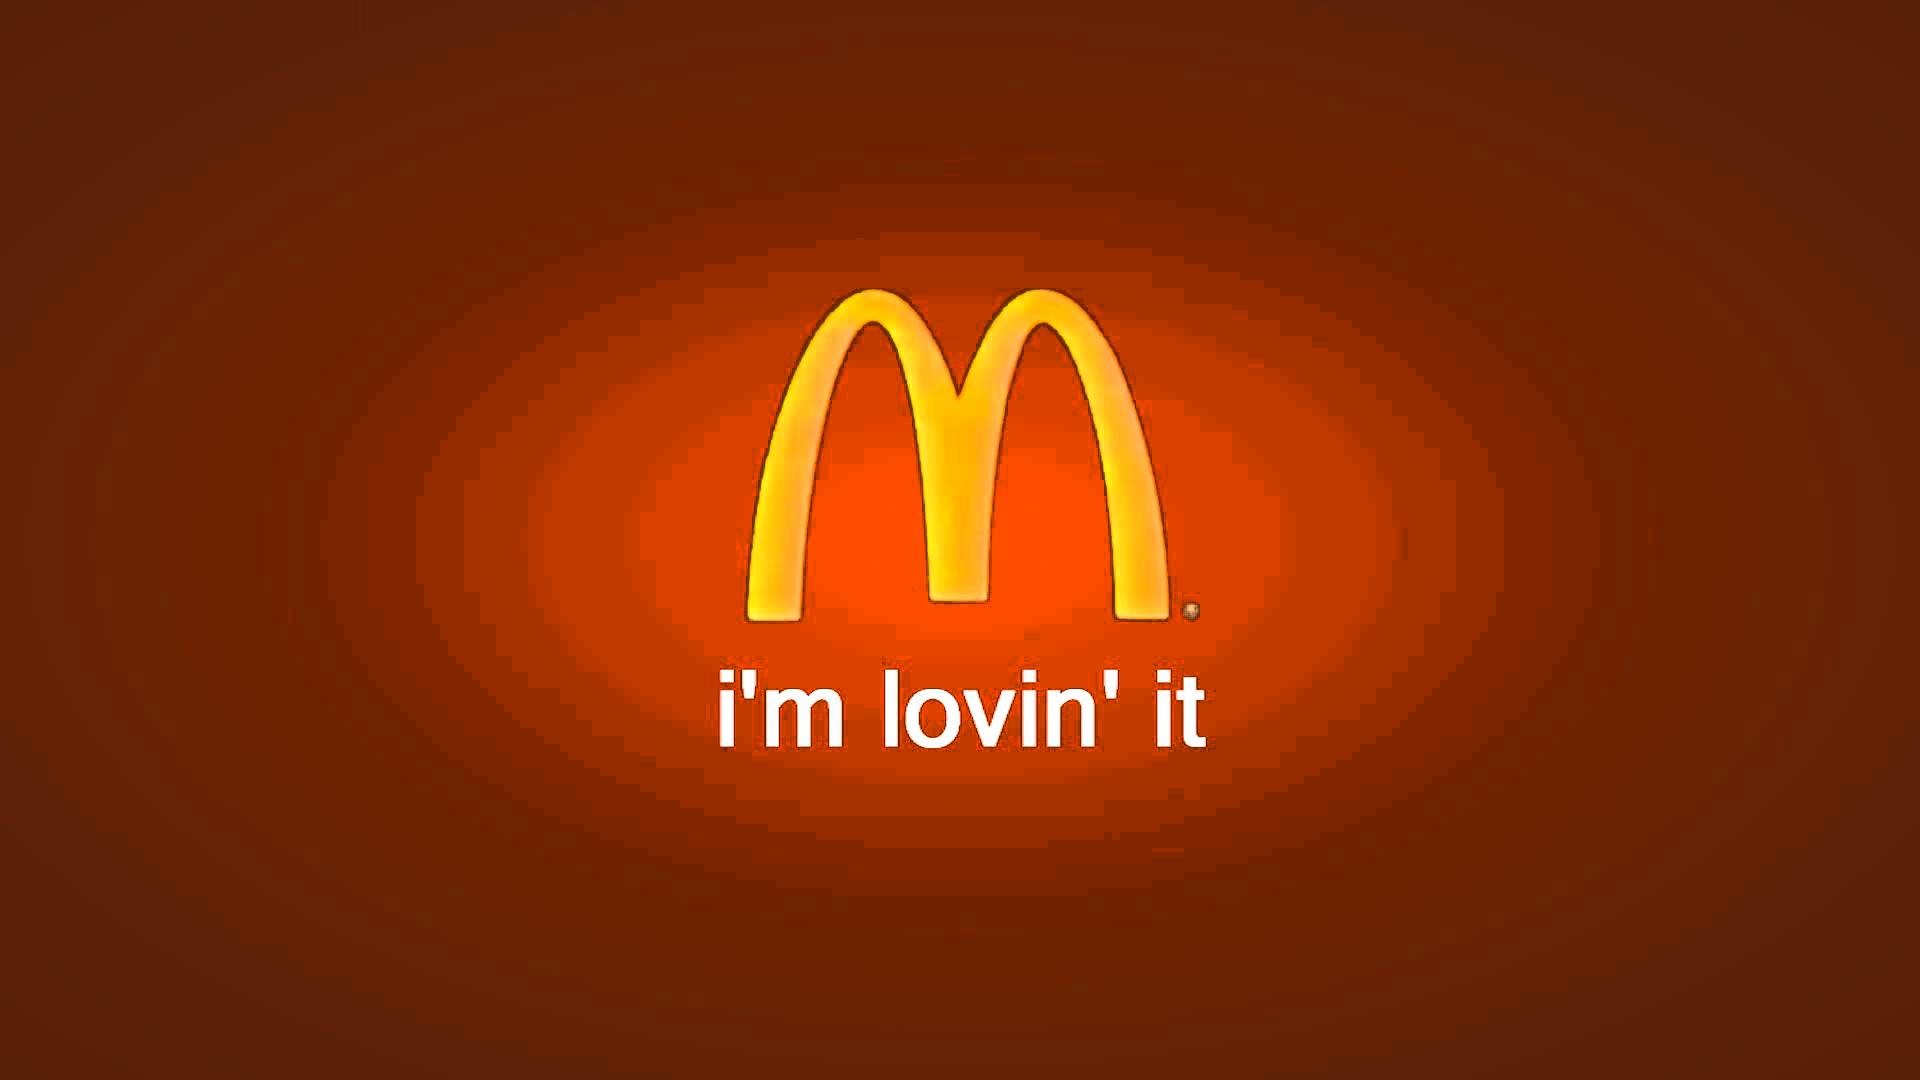 Download Mcdonalds Logo With The Words Im Loving It Wallpaper  Wallpapers com